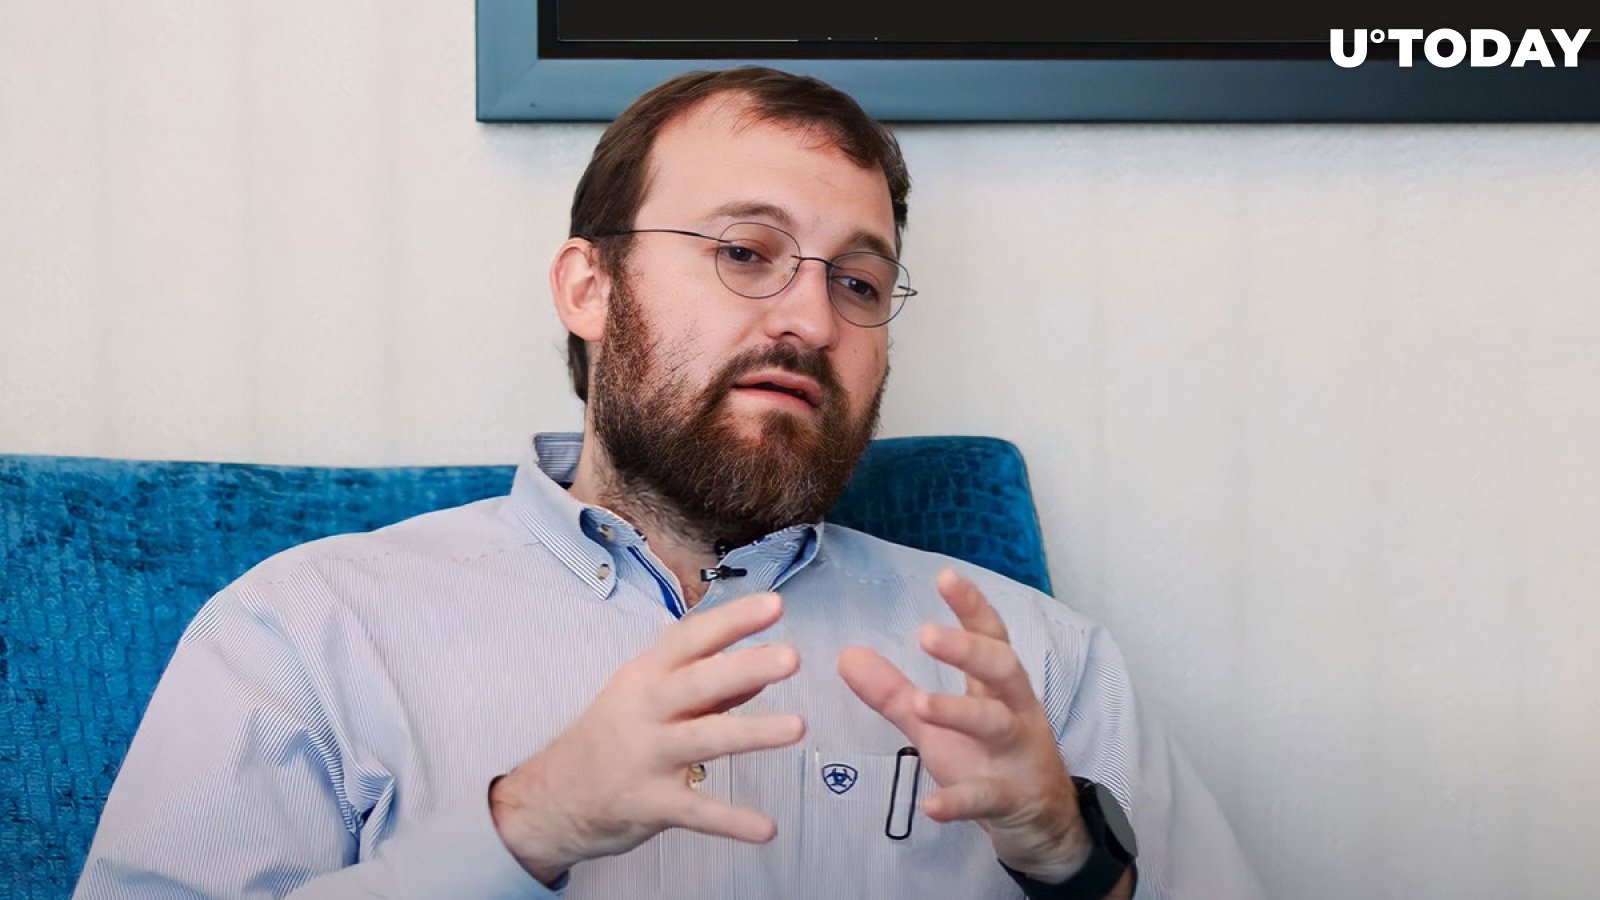 Cardano Founder on XRP and Ethereum, and Why Conspiracy Theories Are Crazy